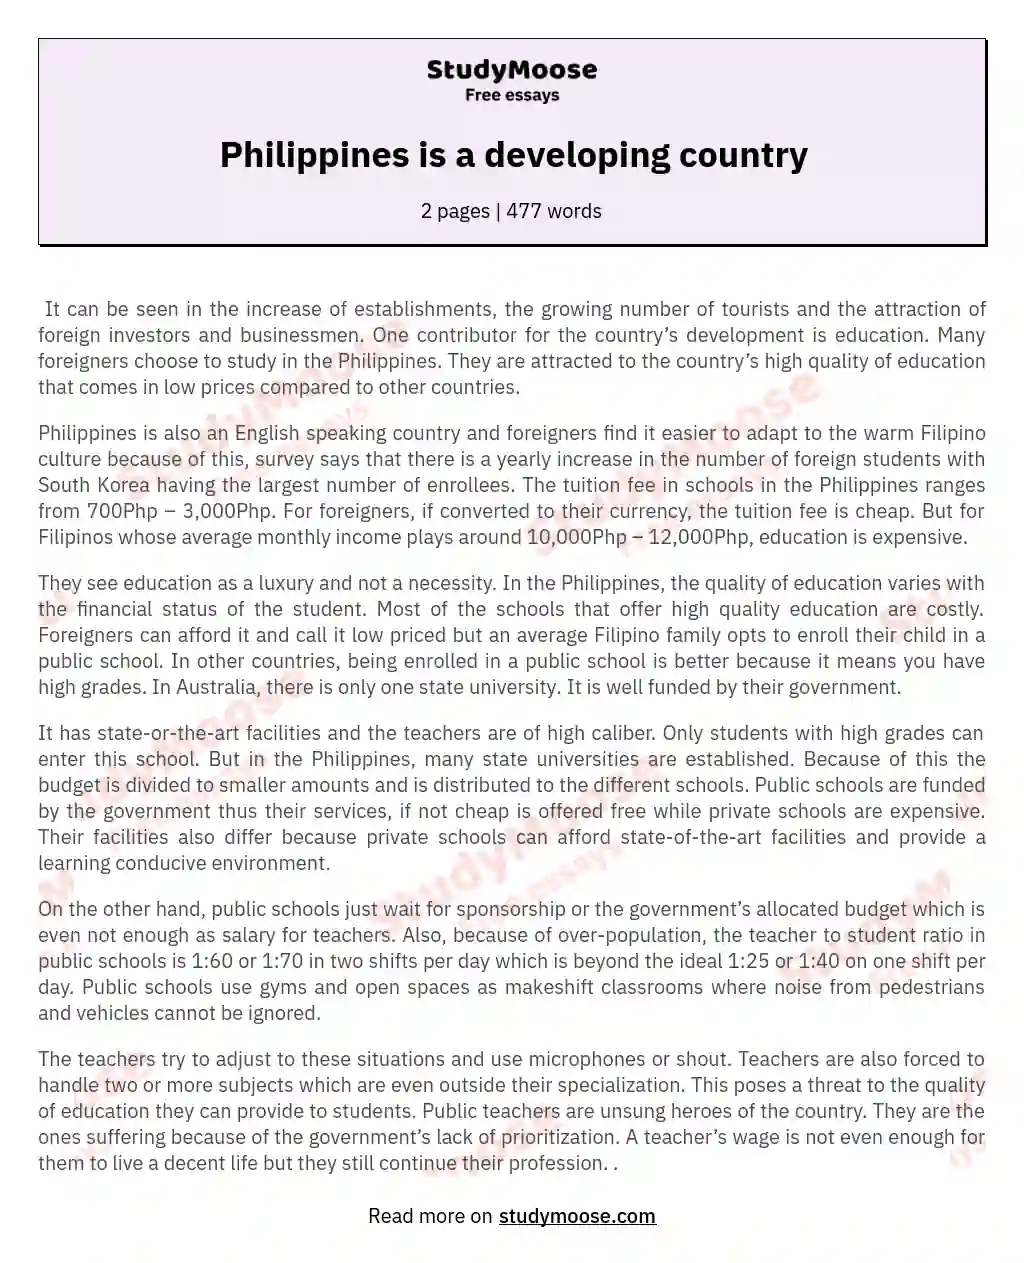 Philippines is a developing country